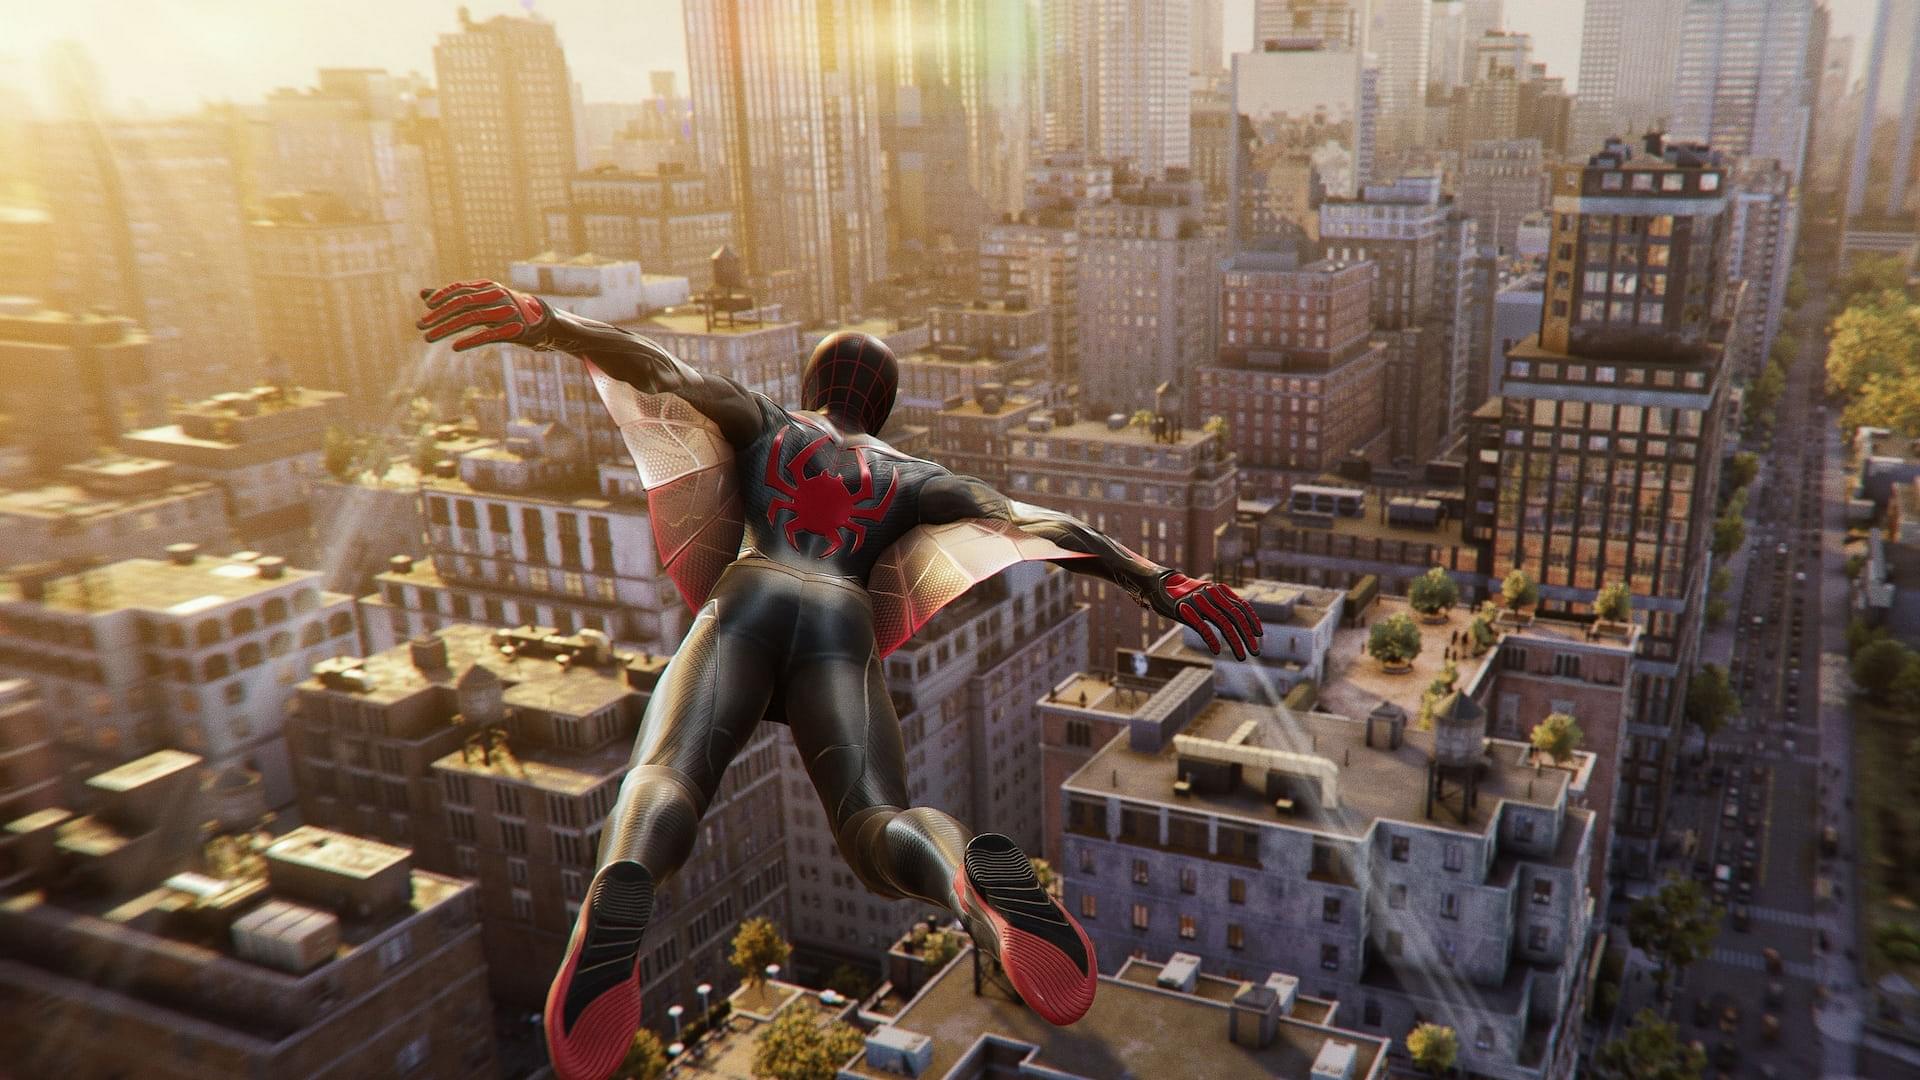 An image showing a screen grab from Spider-Man 2